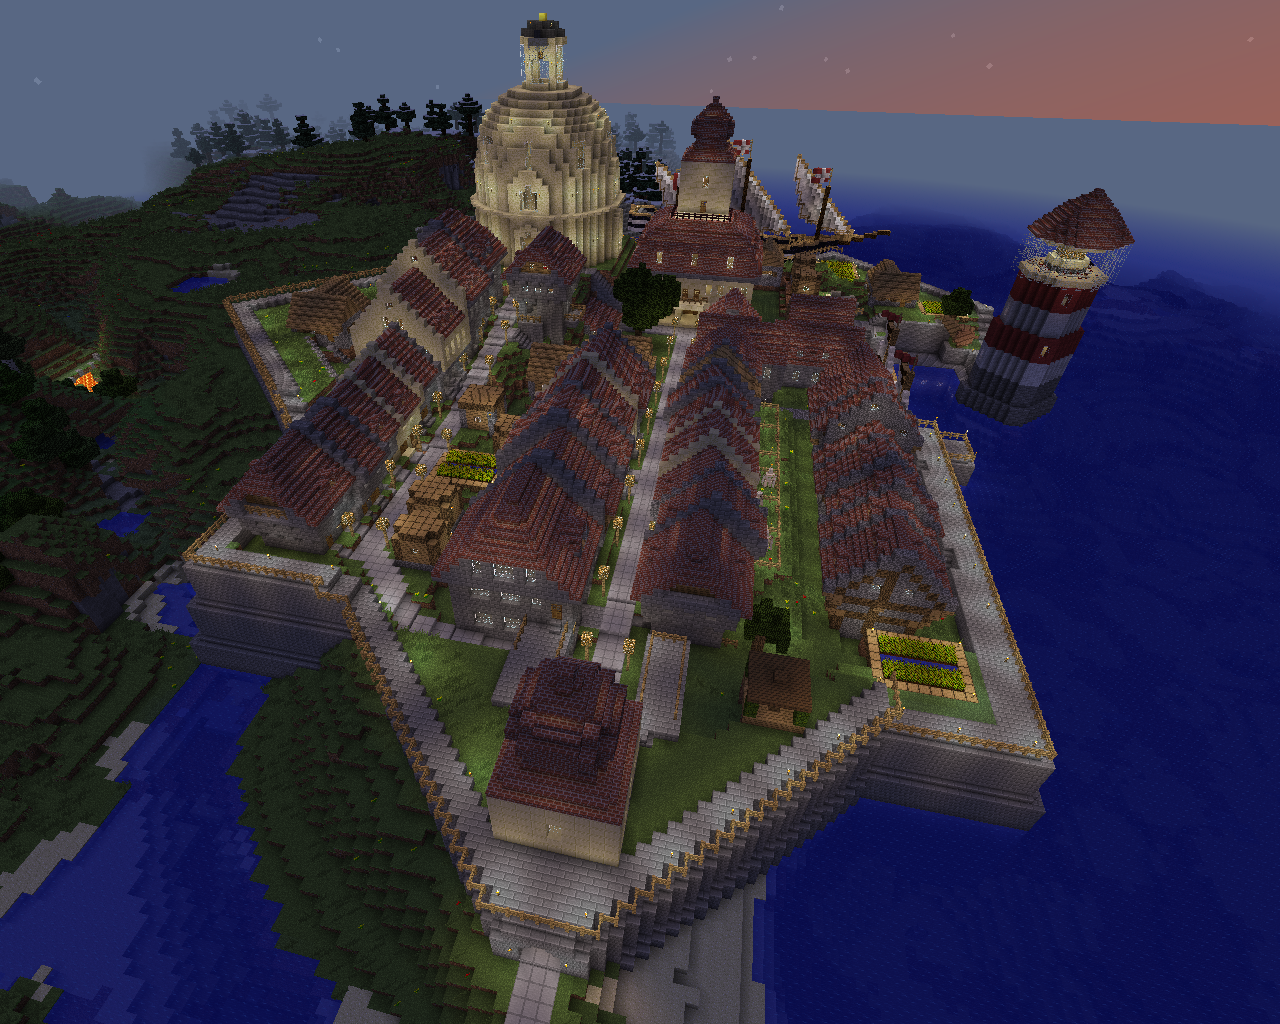 What is the title of this picture ? Seegras Logbook » Blog Archive » Minecraft: Medieval/Baroque Town